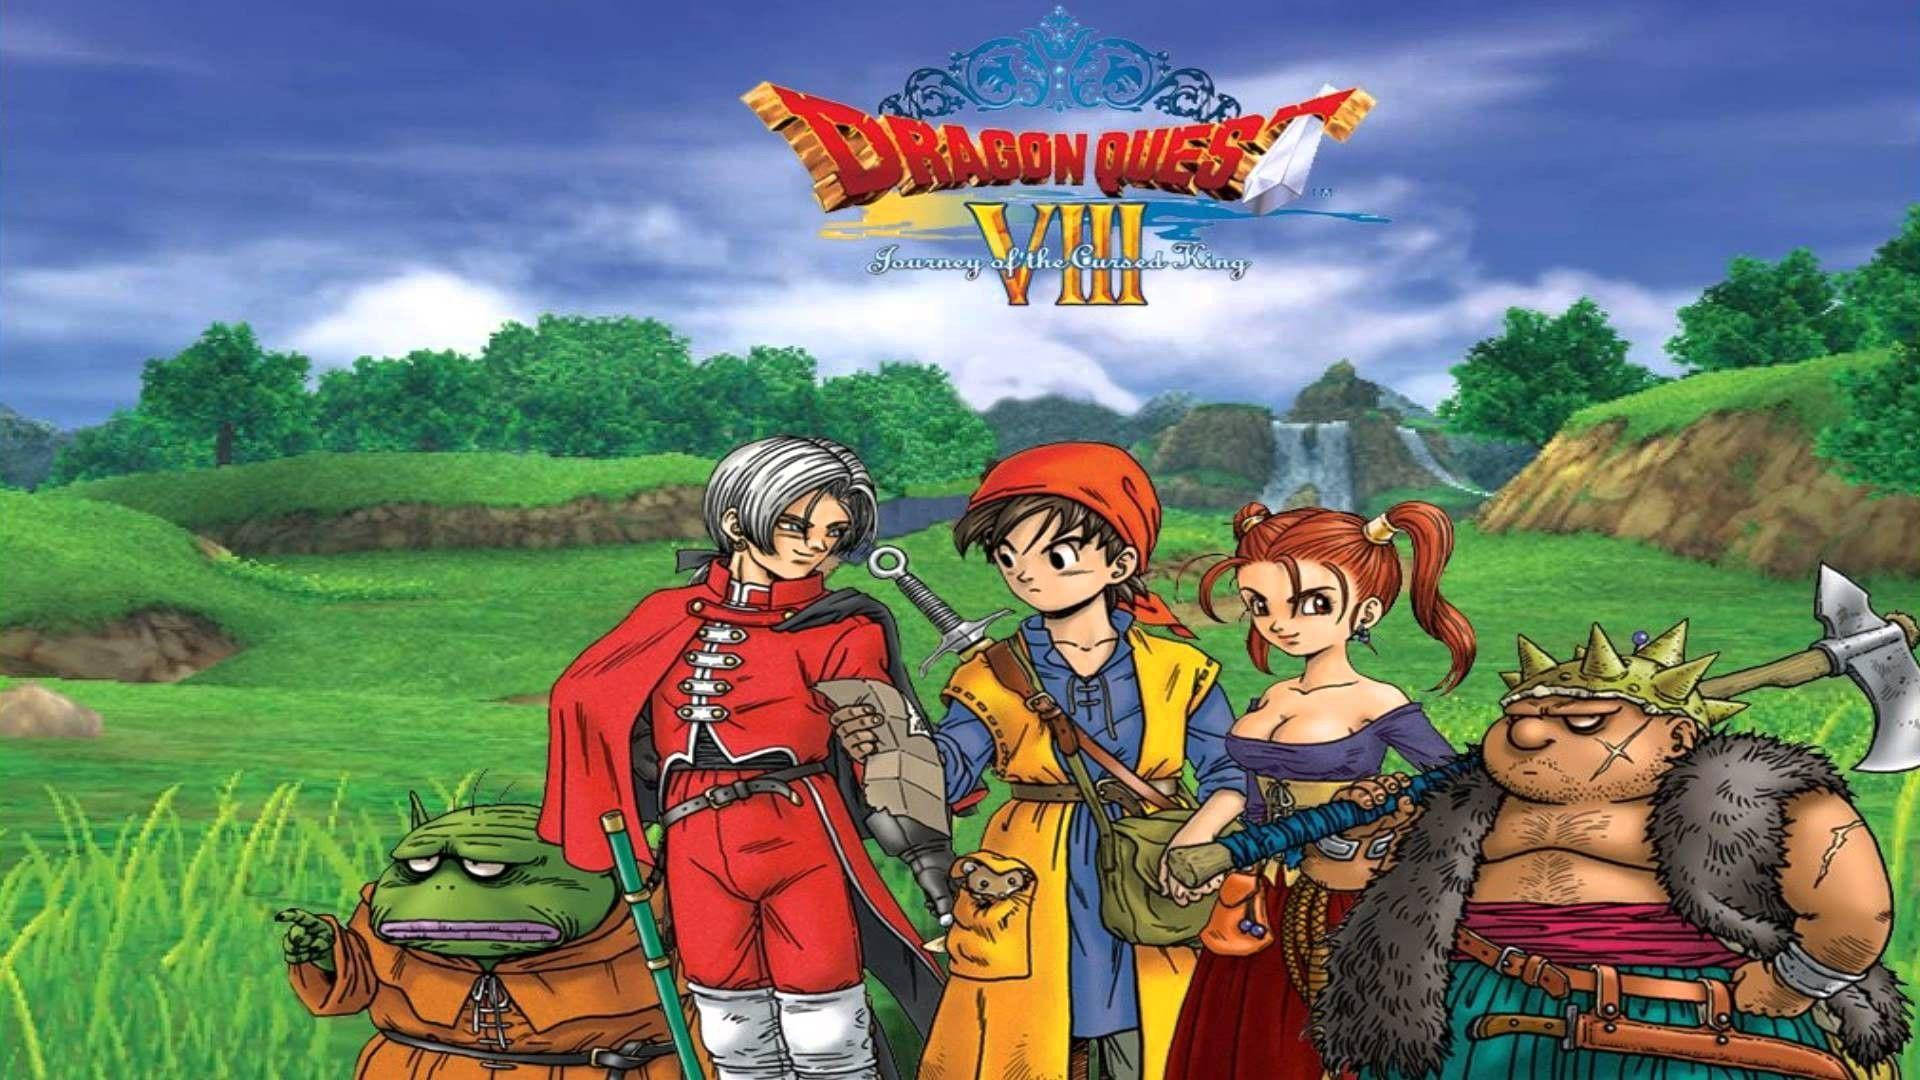 Dragon Quest Viii Protagonists In A Grassy Field Background